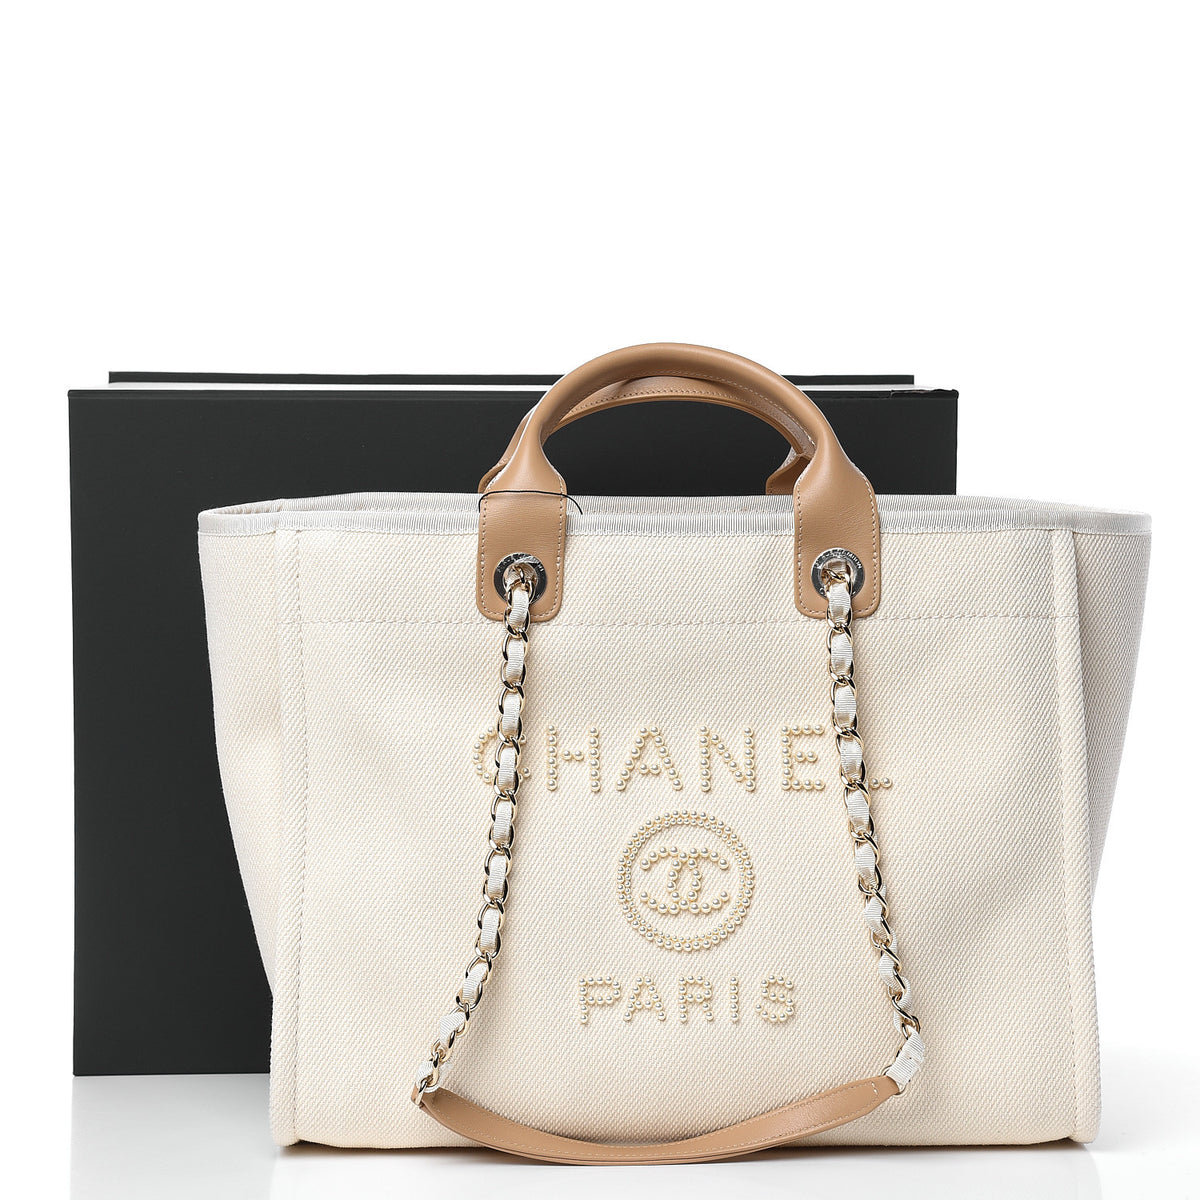 Chanel Canvas Large Deauville Tote Beige Black – Coco Approved Studio